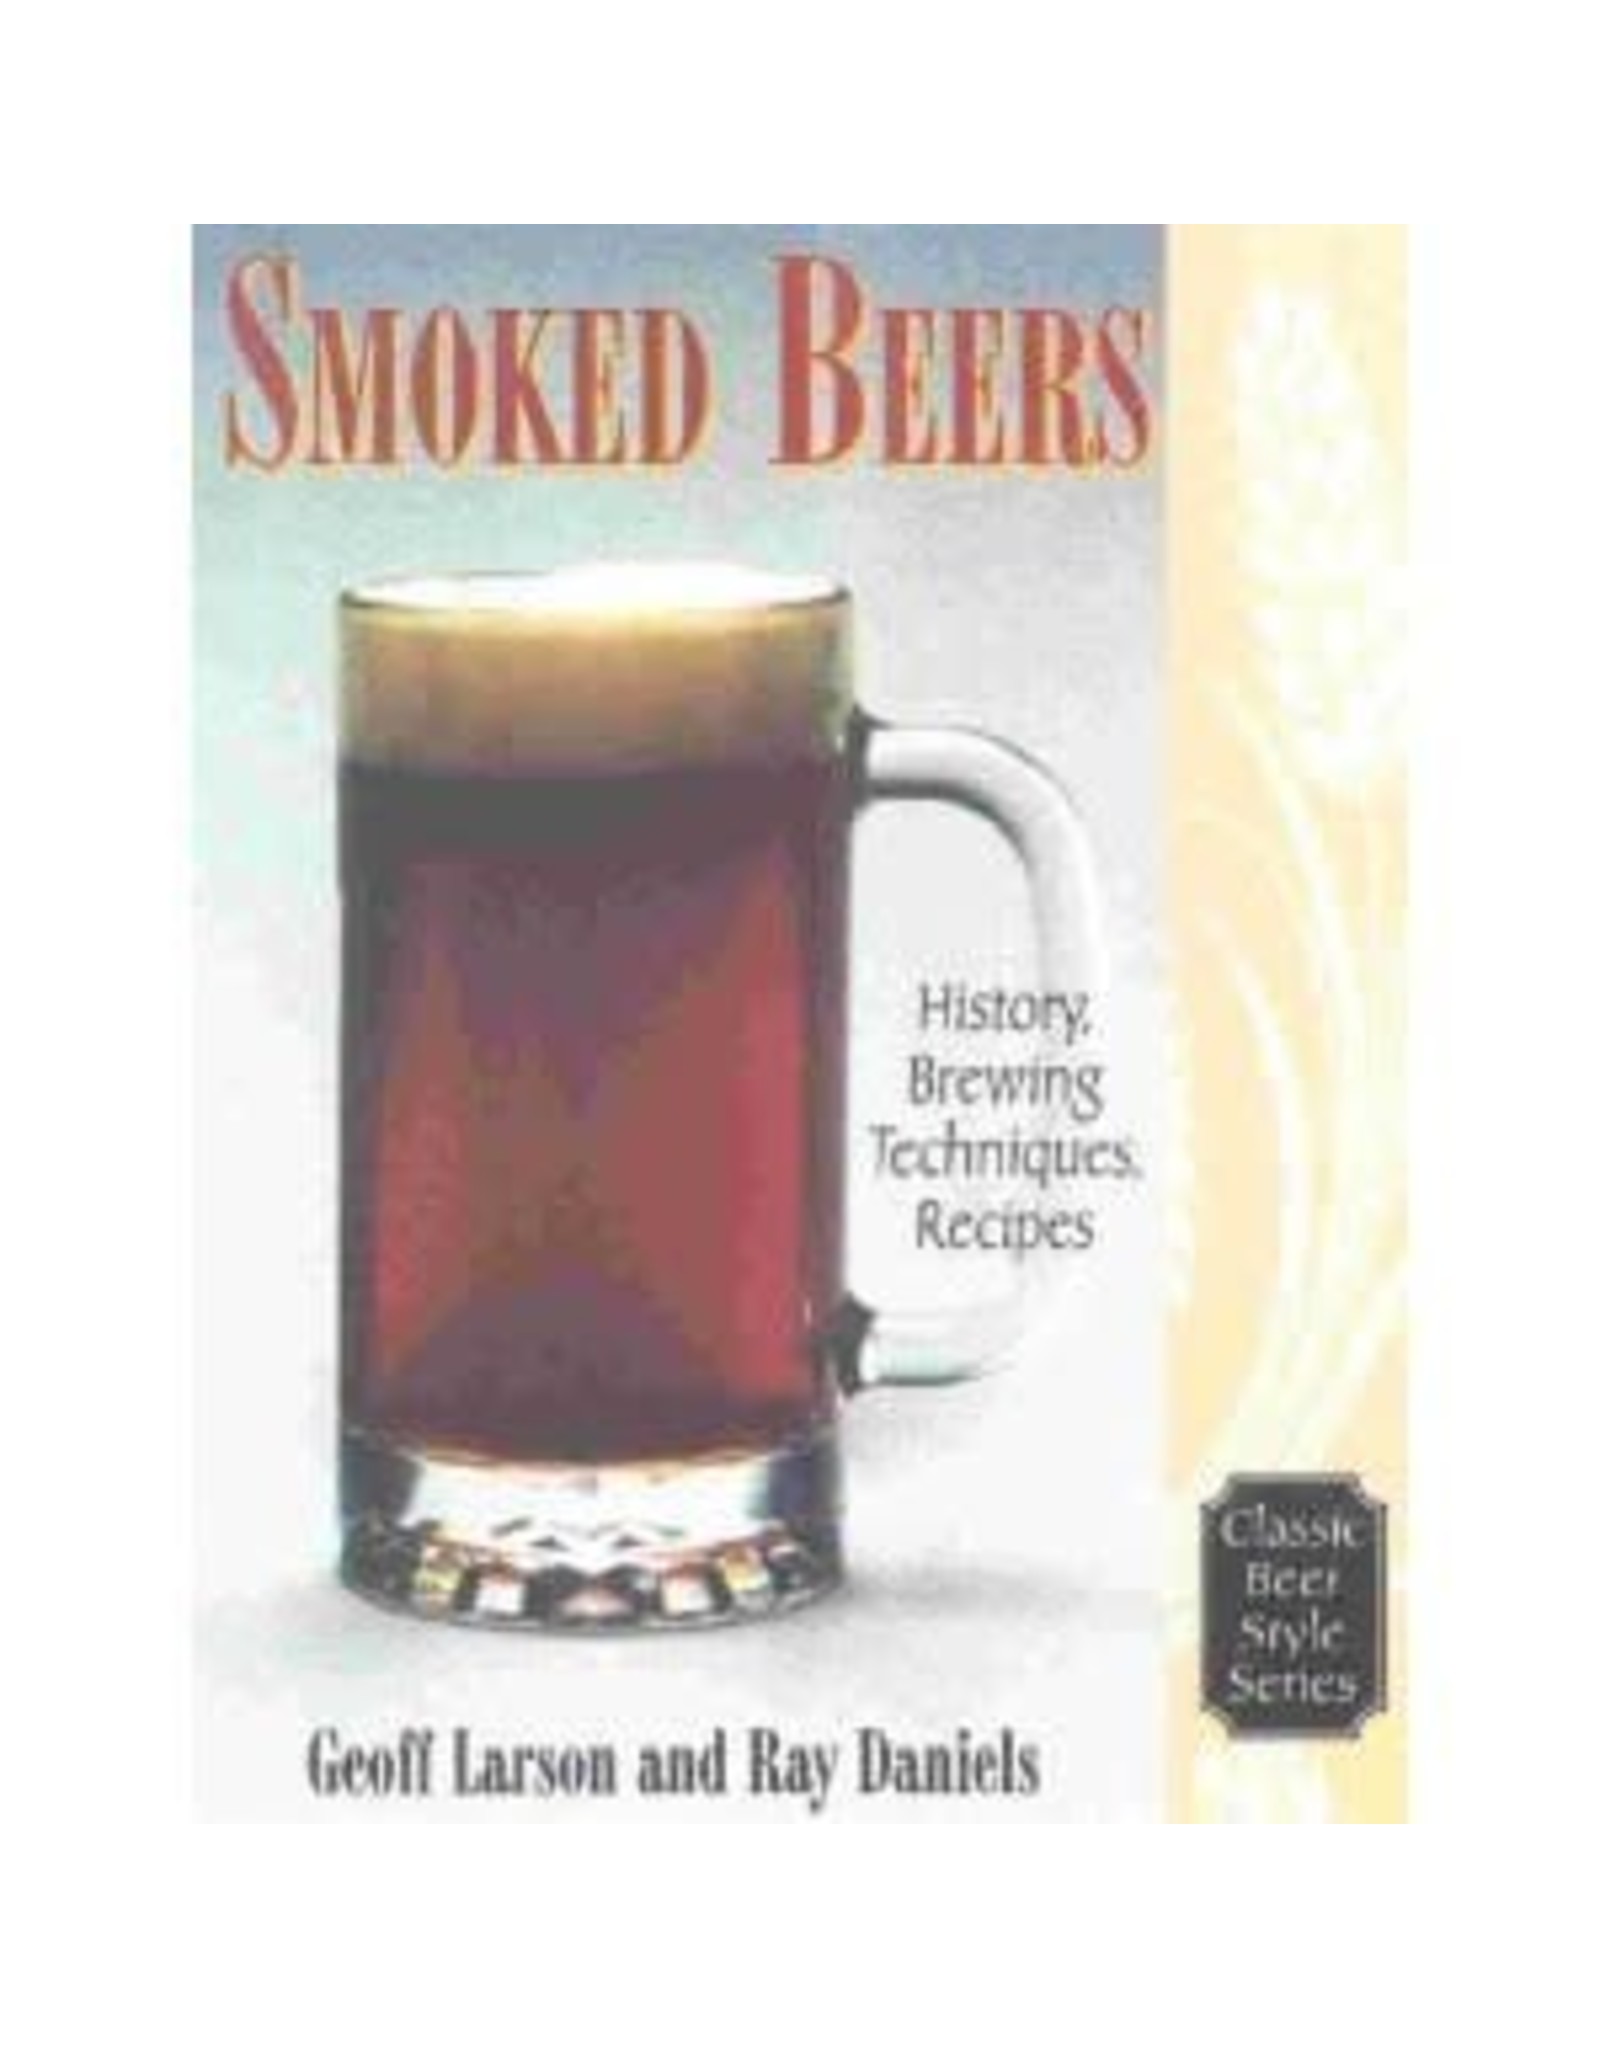 CLASSIC BEER STYLE SMOKED BEER